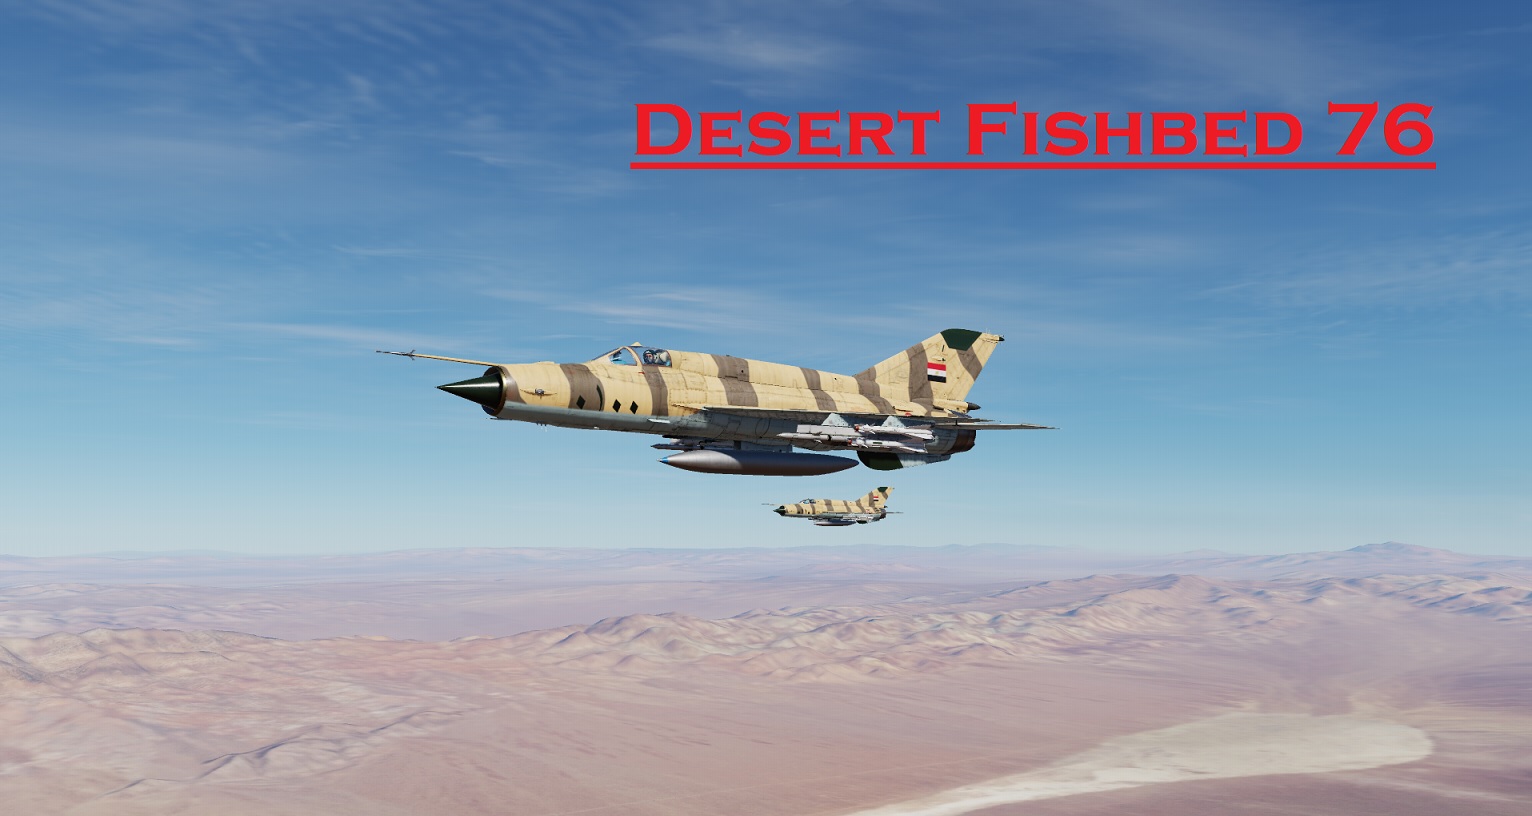 Desert Fishbed 76 using Mbot Dynamic Campaign Engine